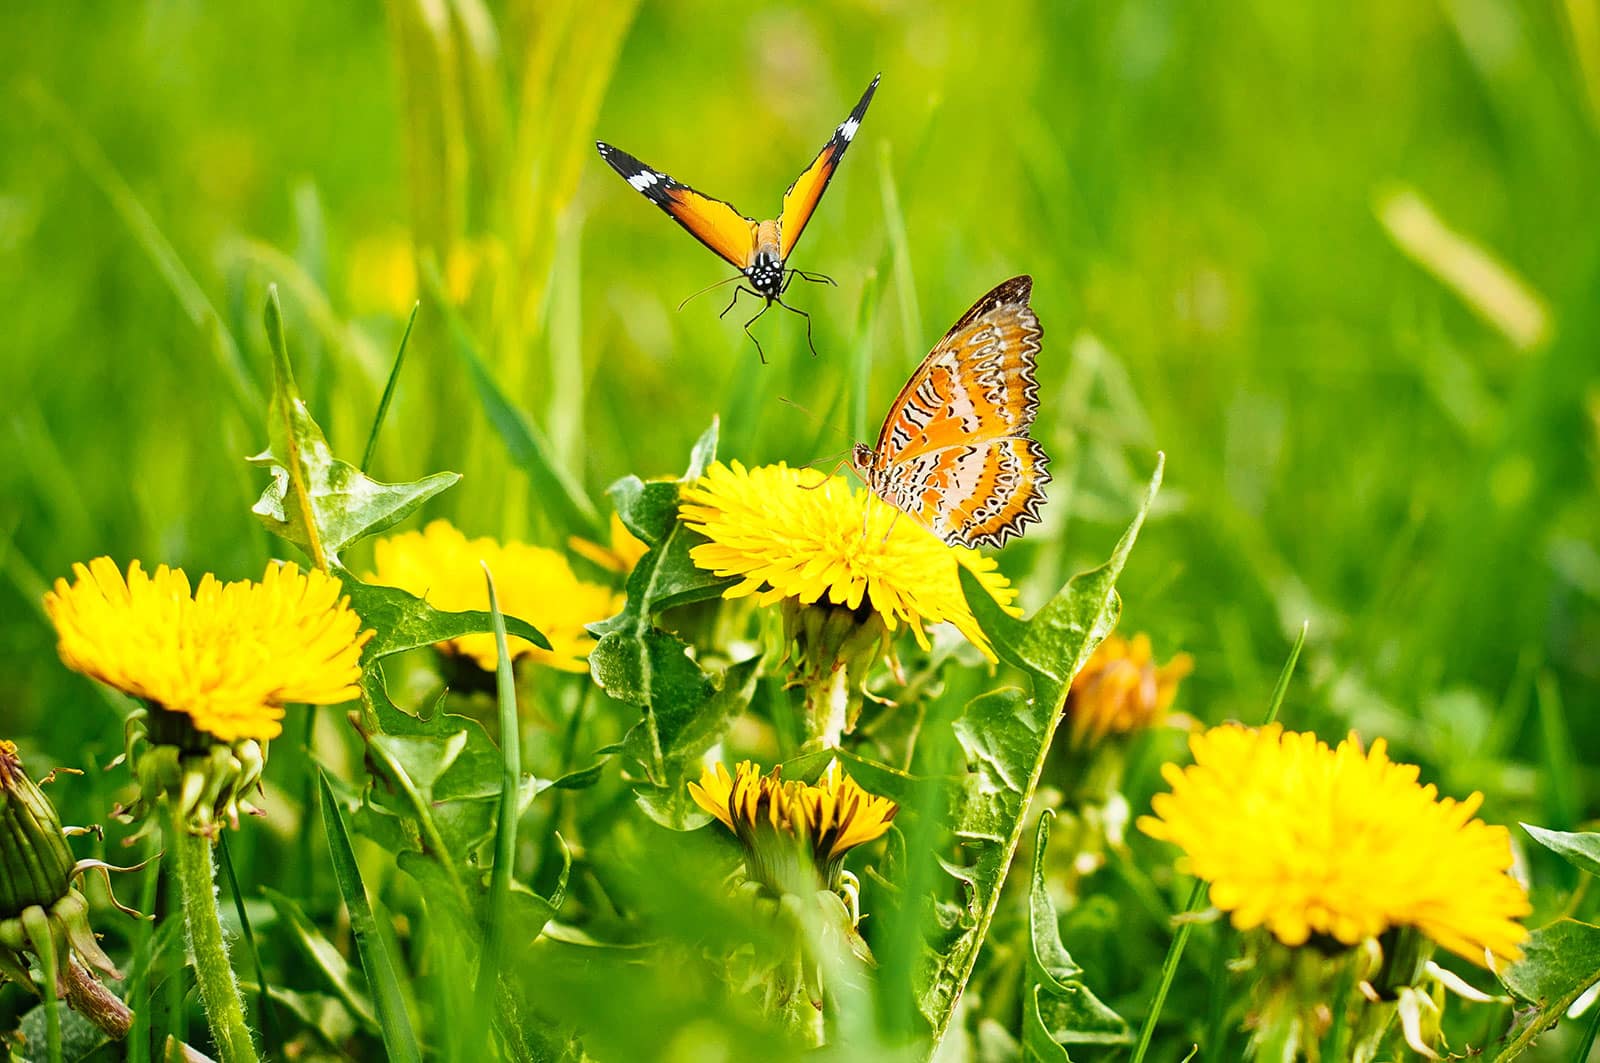 Two orange and brown butterflies landing on a patch of dandelions in a lawn